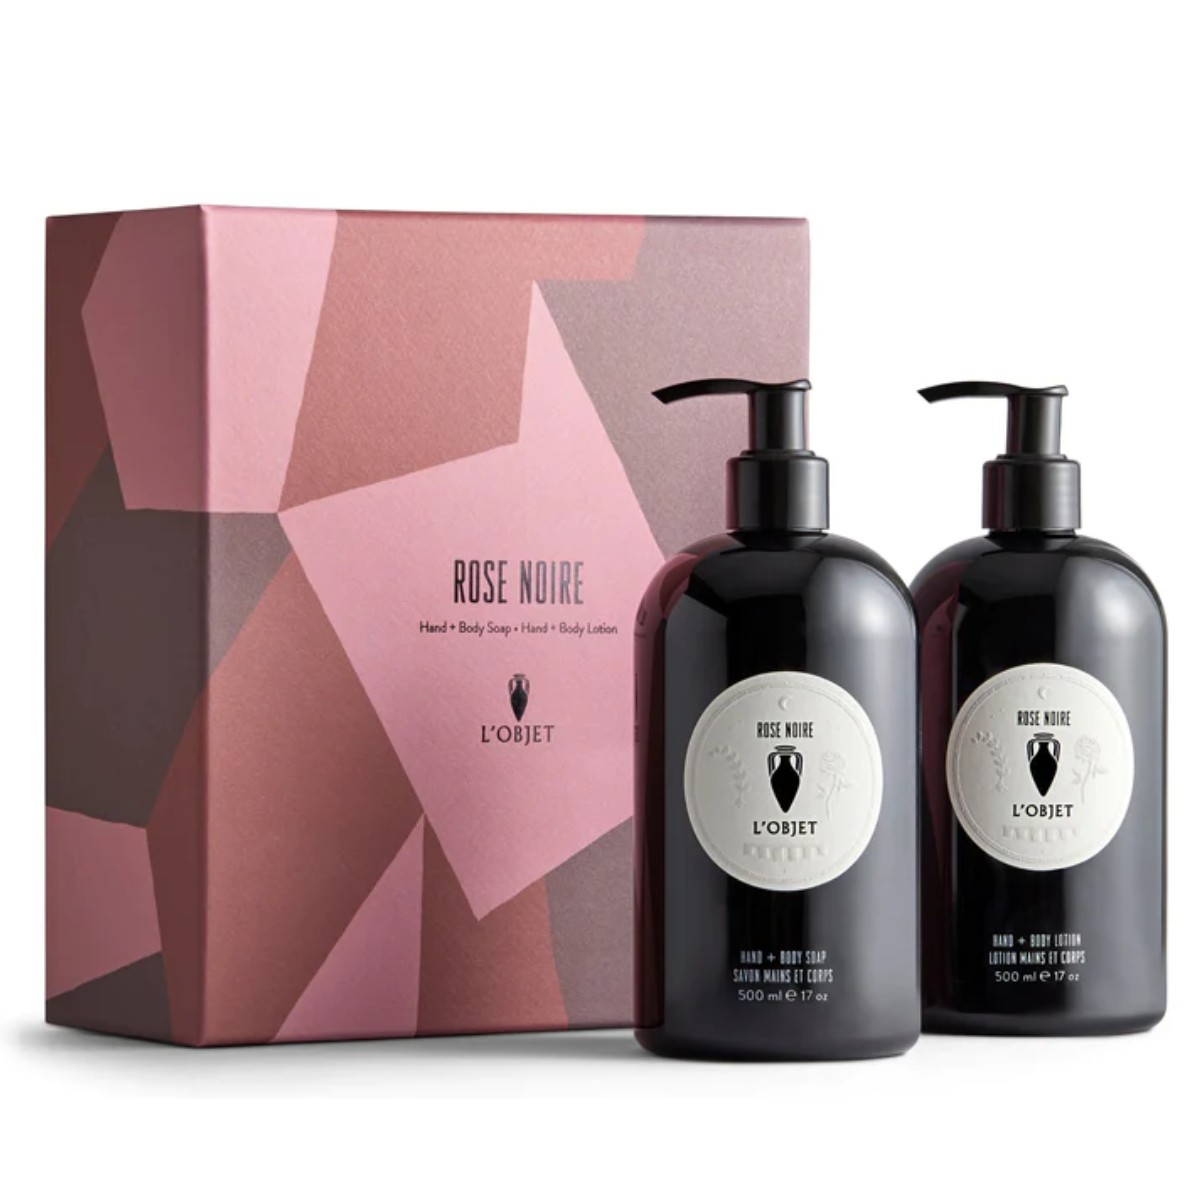 L’Objet | Rose Noire Hand & Body Soap and Lotion Gift Set